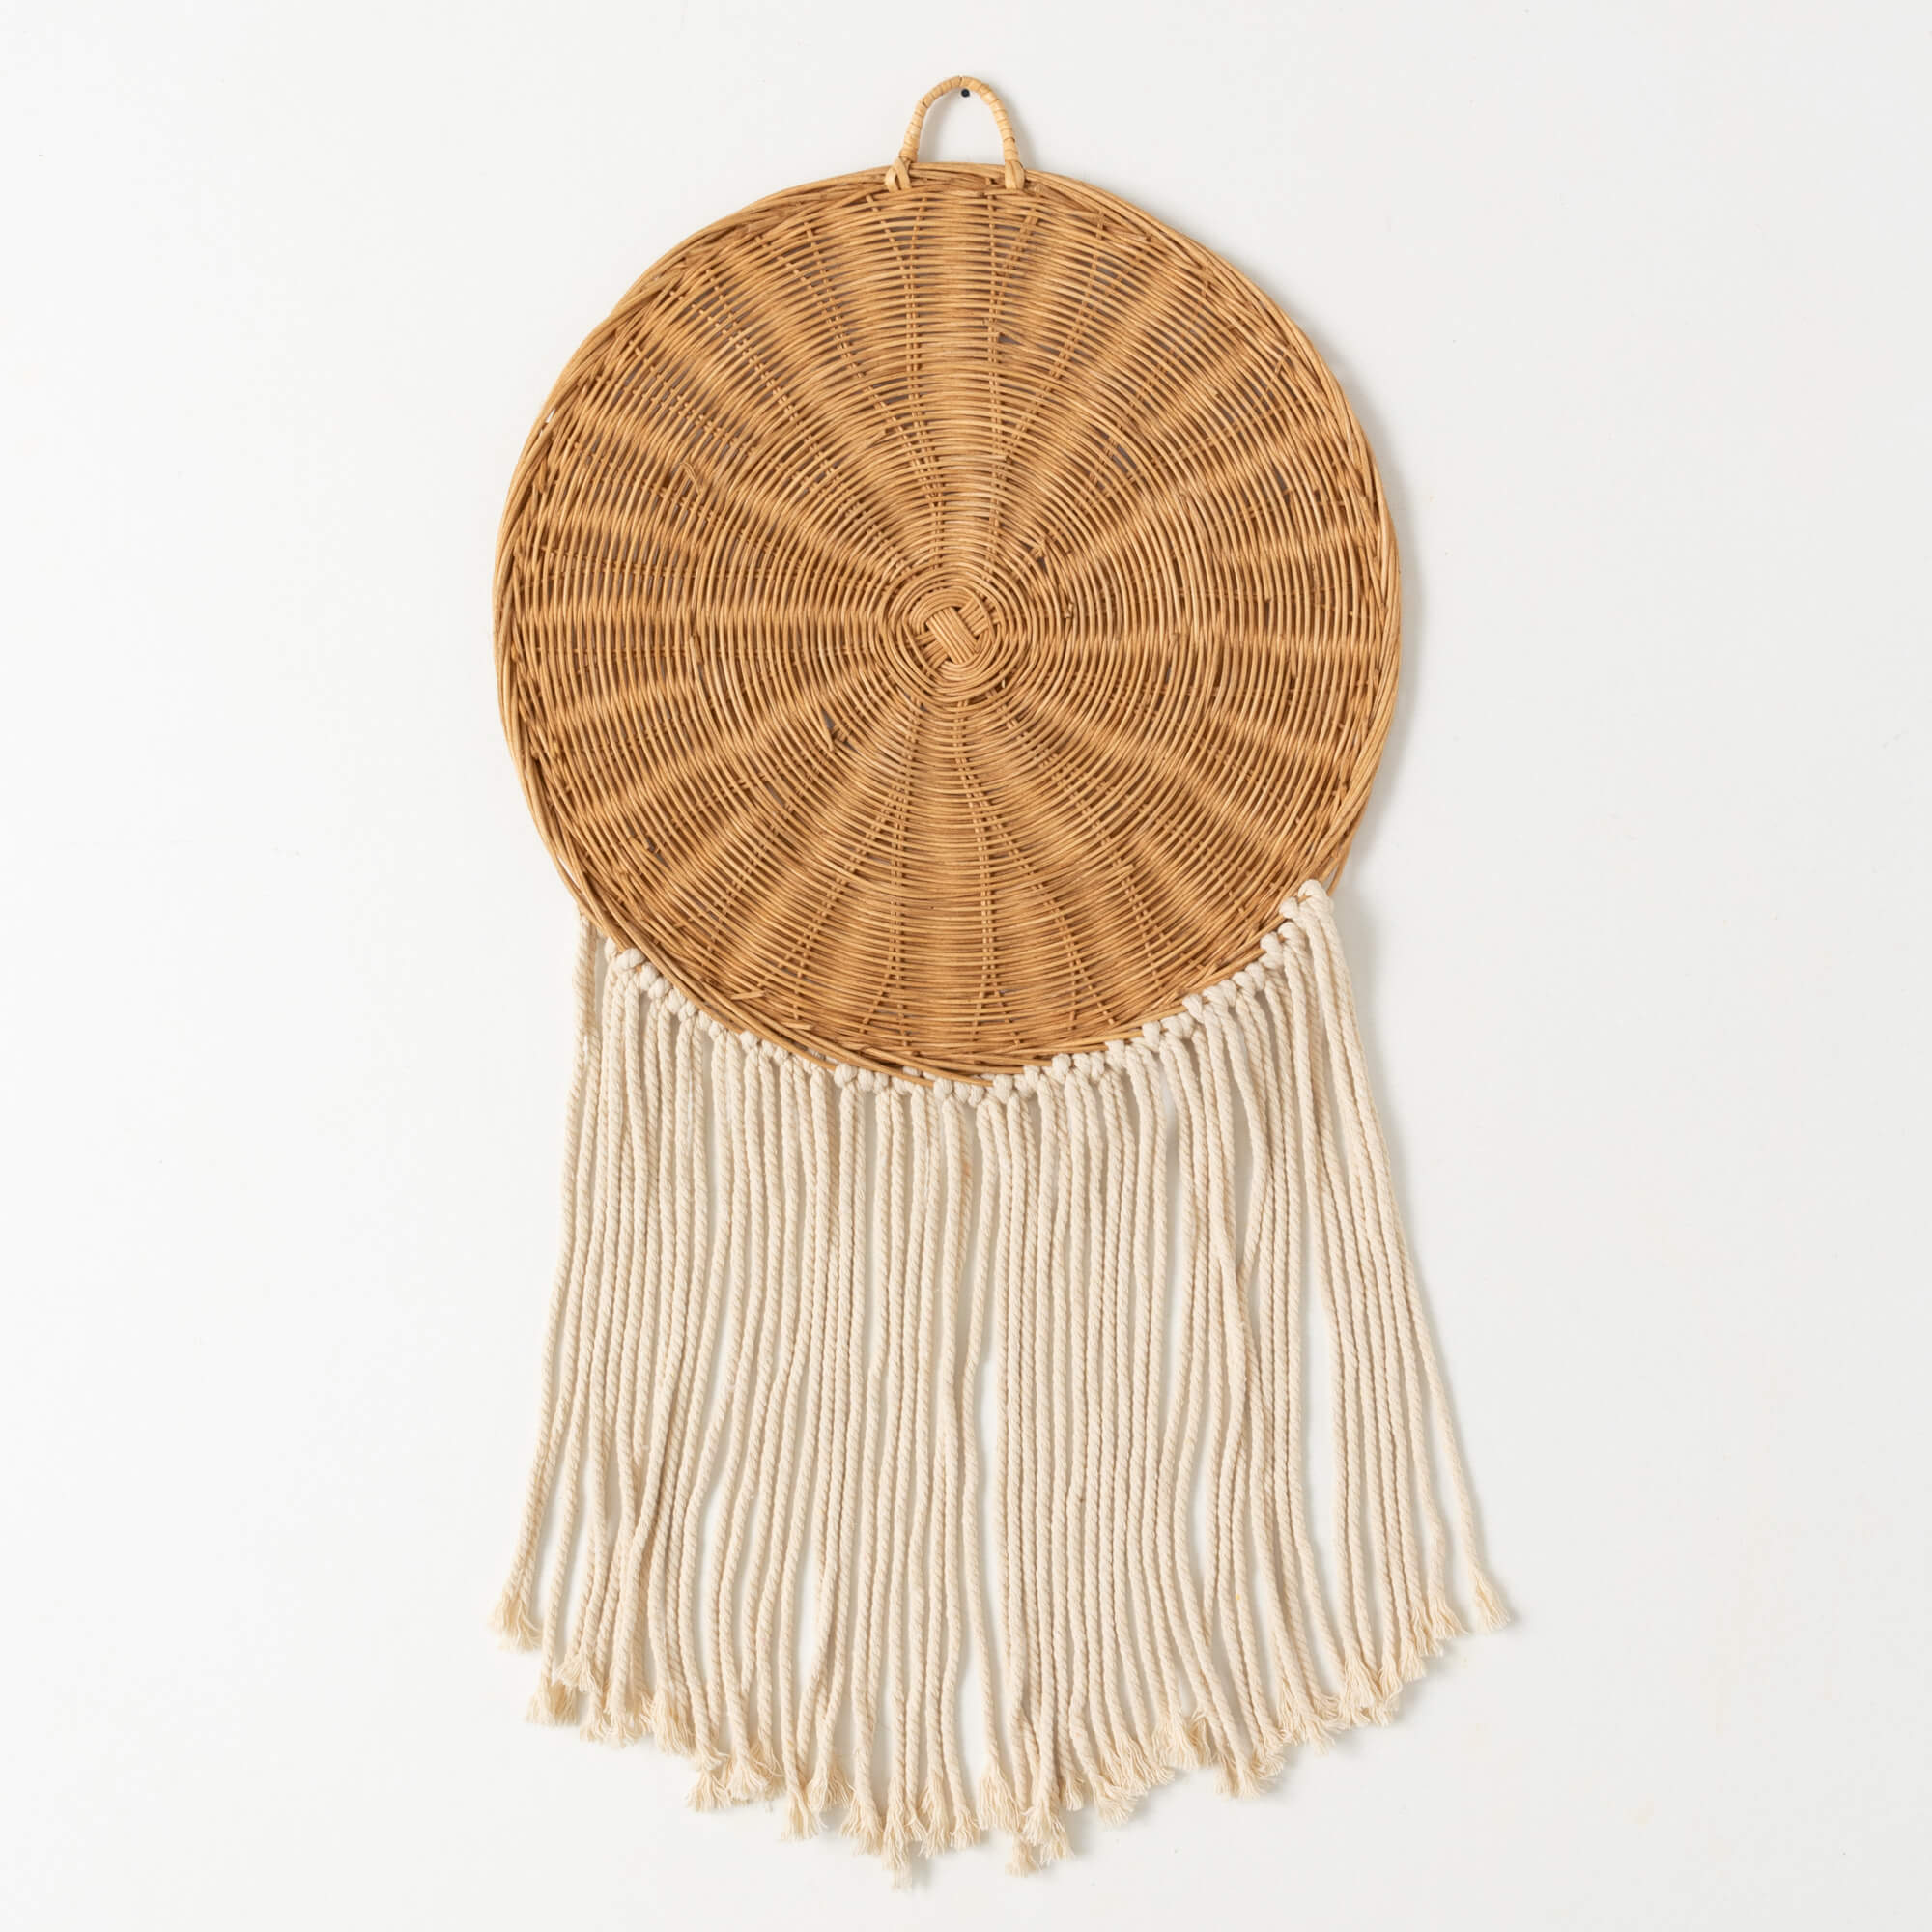 WOVEN WALL HANGING